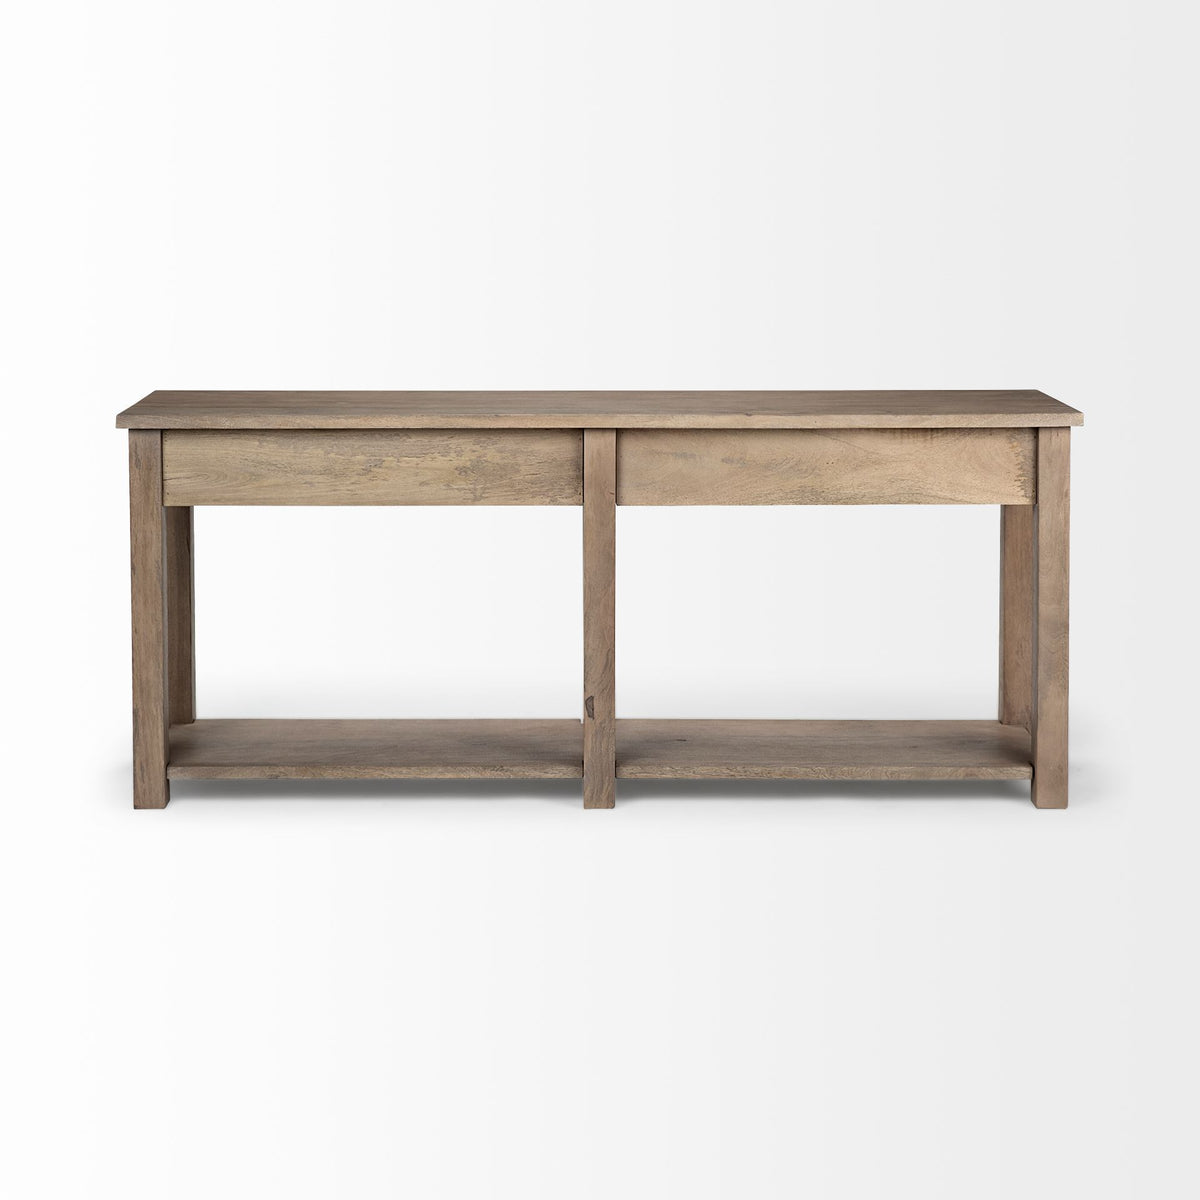 Harrelson Console Table